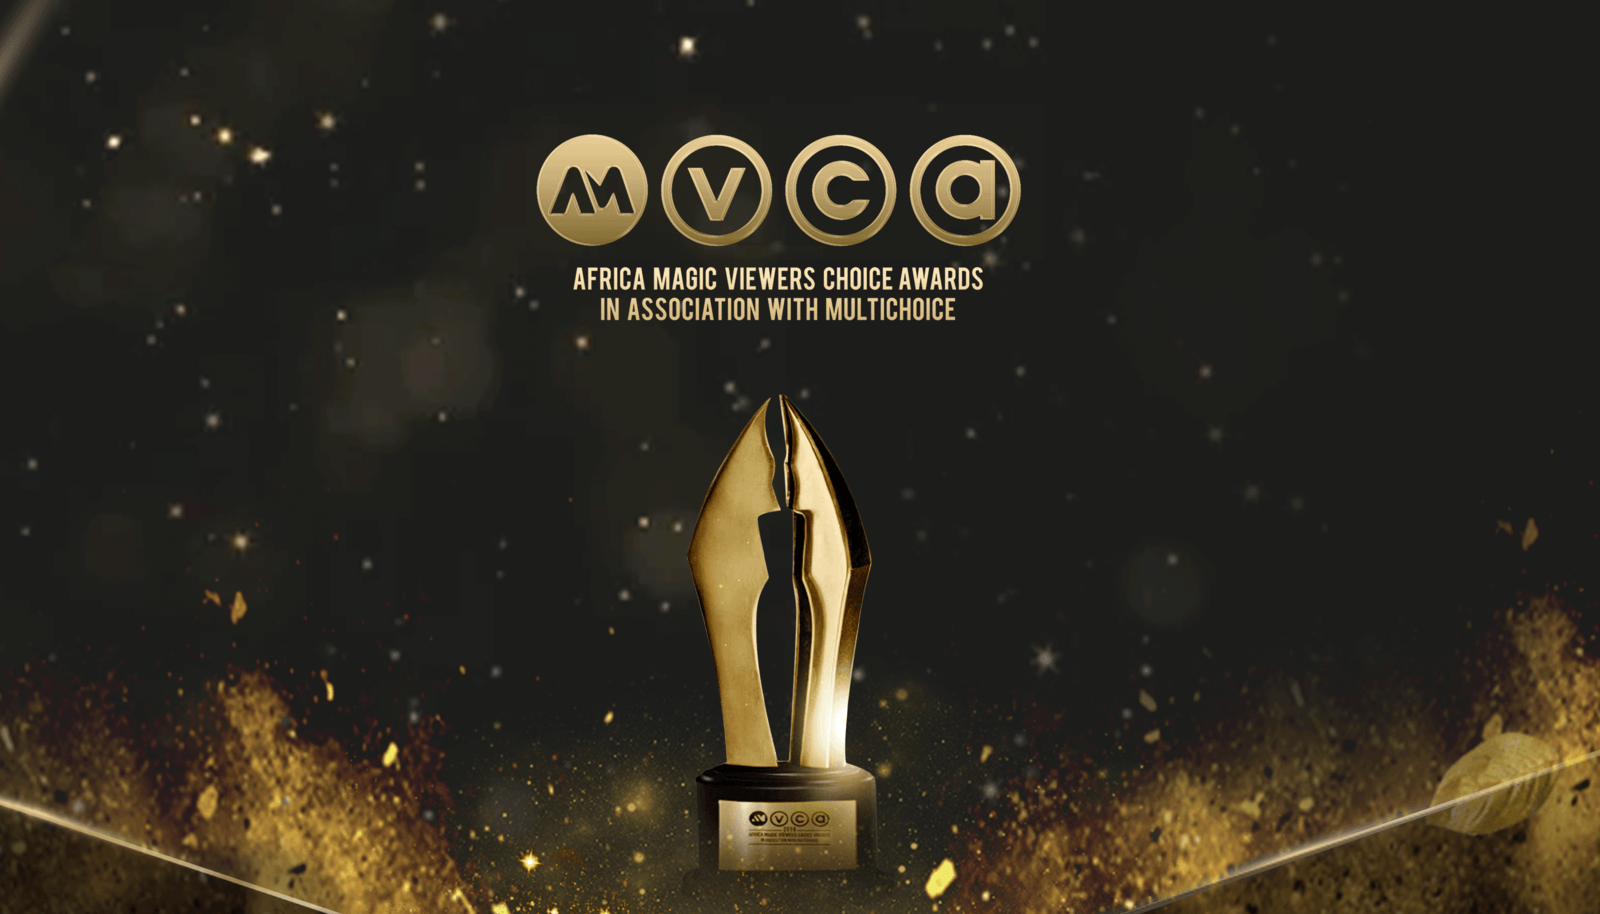 AMVCAs Back For The Tenth Edition